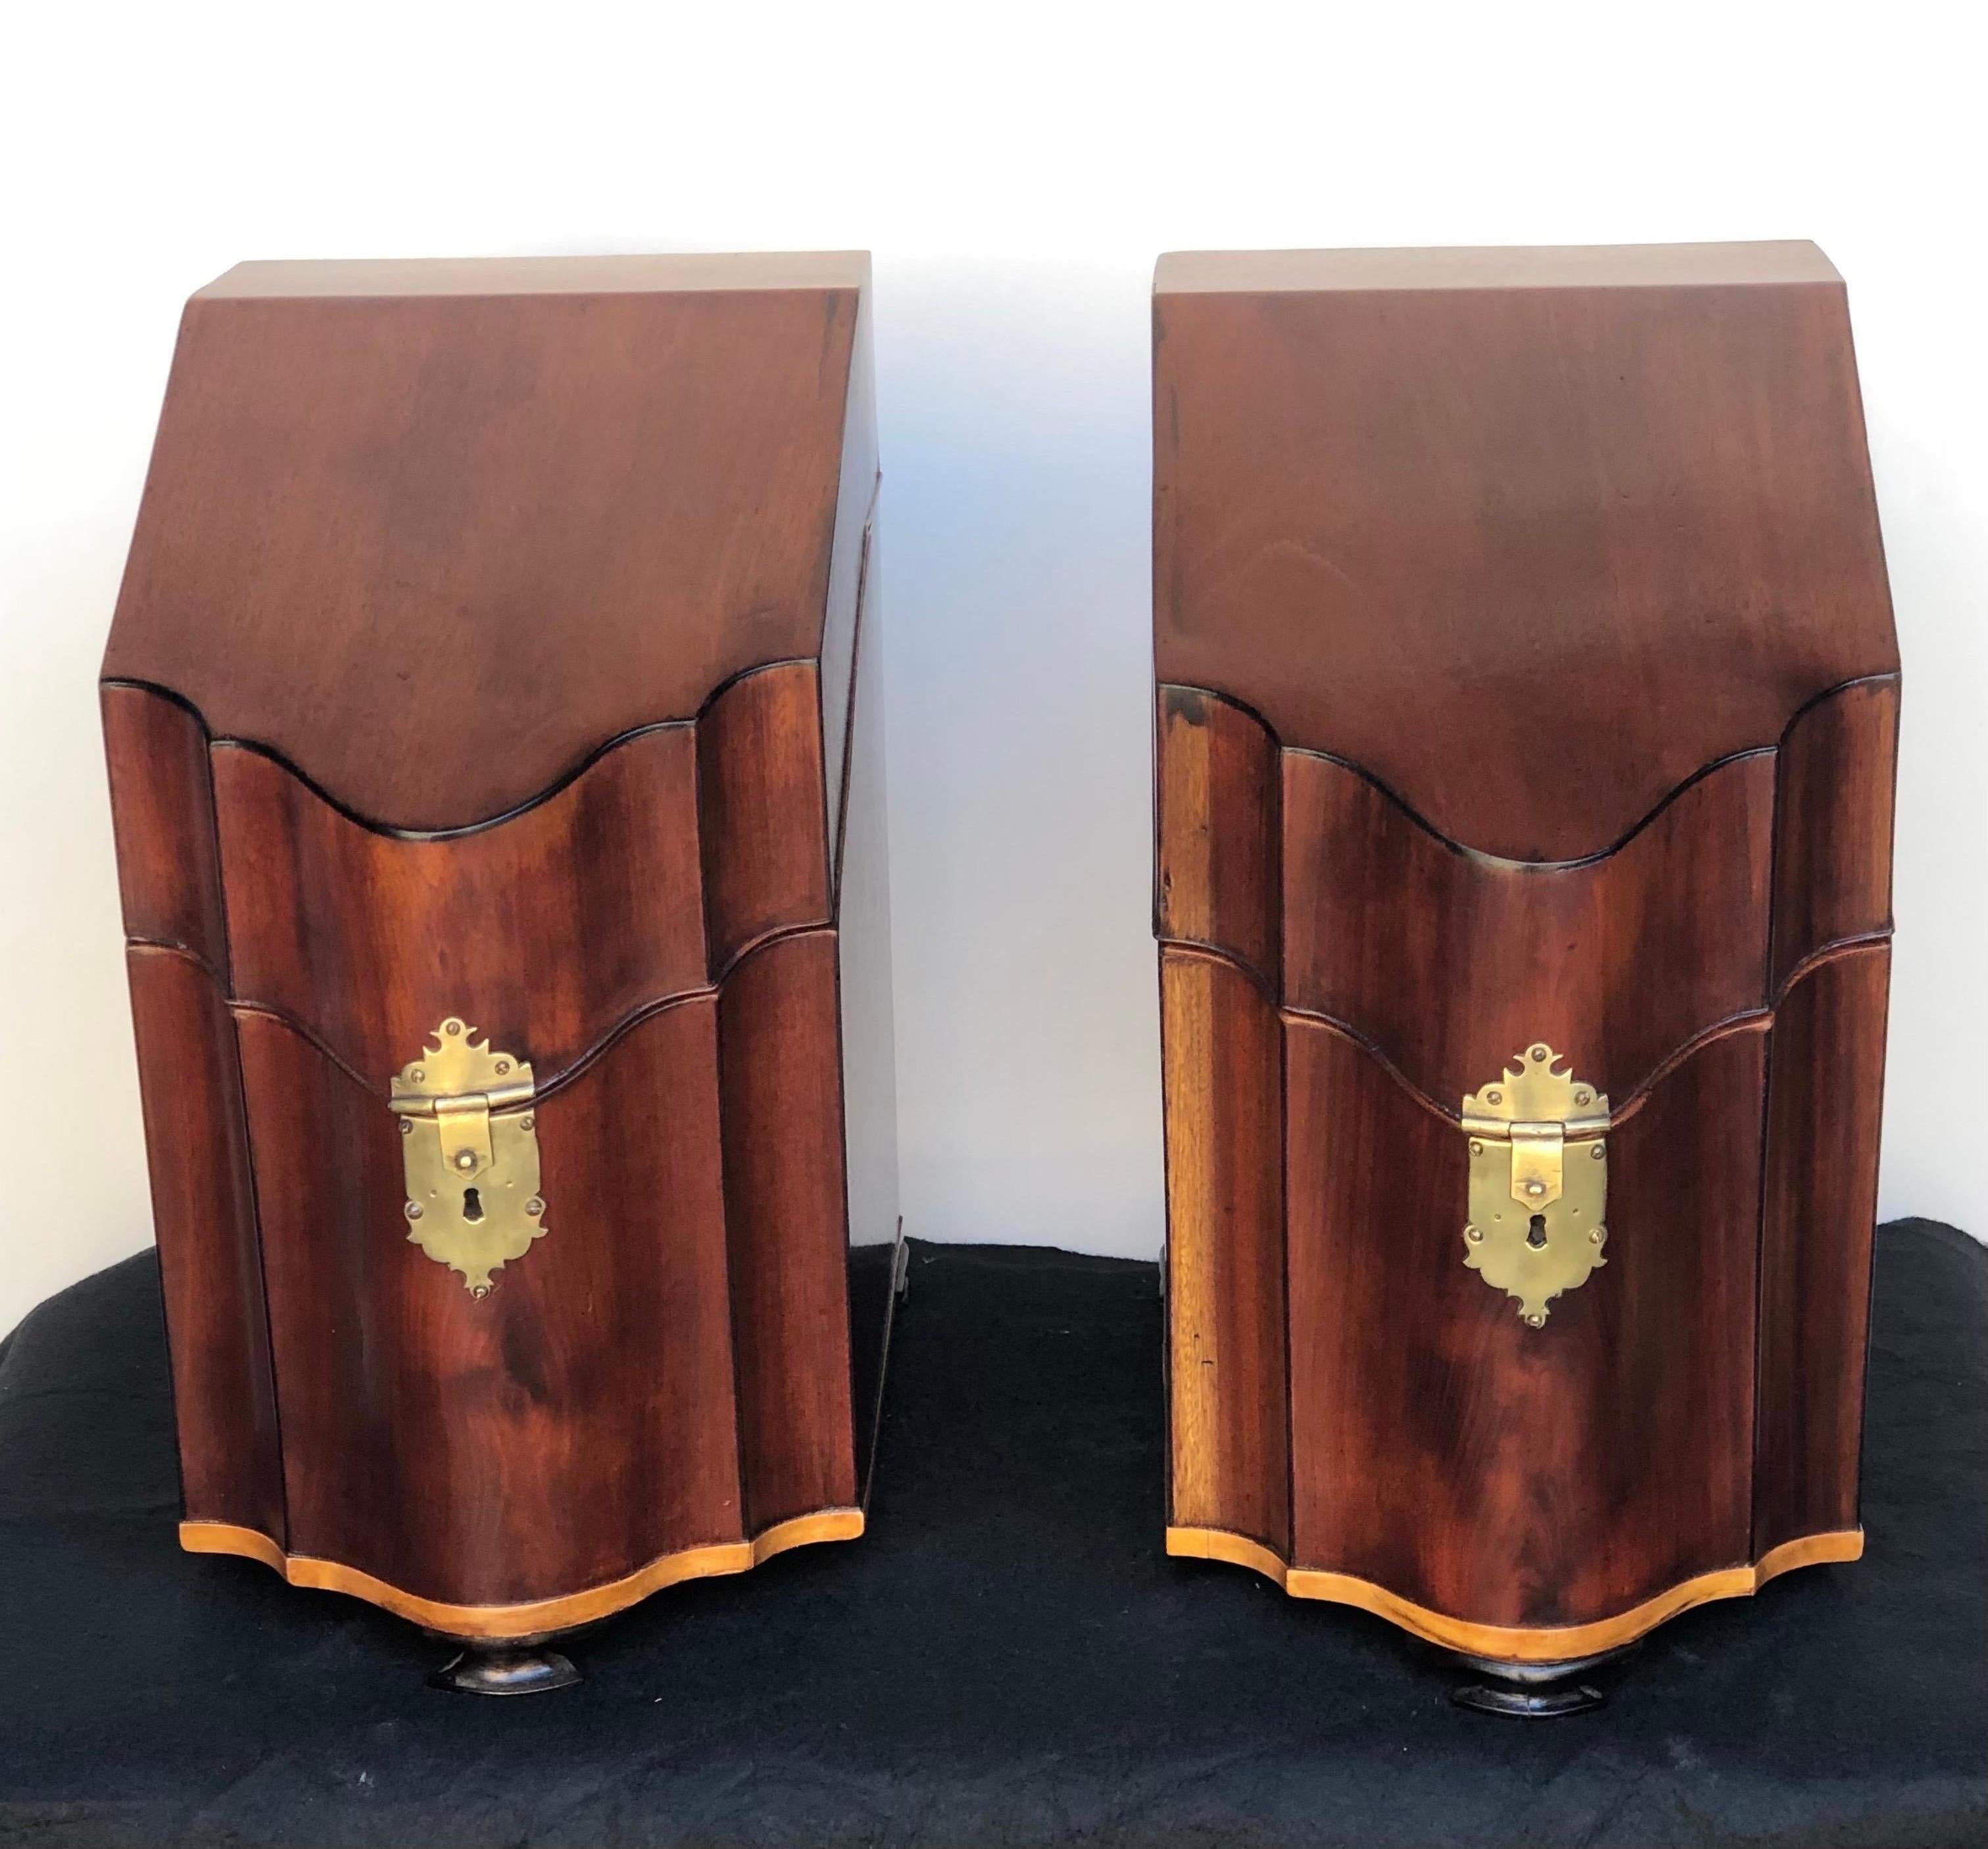 This Elegant pair of English George III mahogany Serpentine inlaid cutlery Boxes on Ogee Bracket Feet with the original Cutlery fitted interiors where made in the late 18th century. The neoclassical Serpentine knife boxes have a canted lid and are